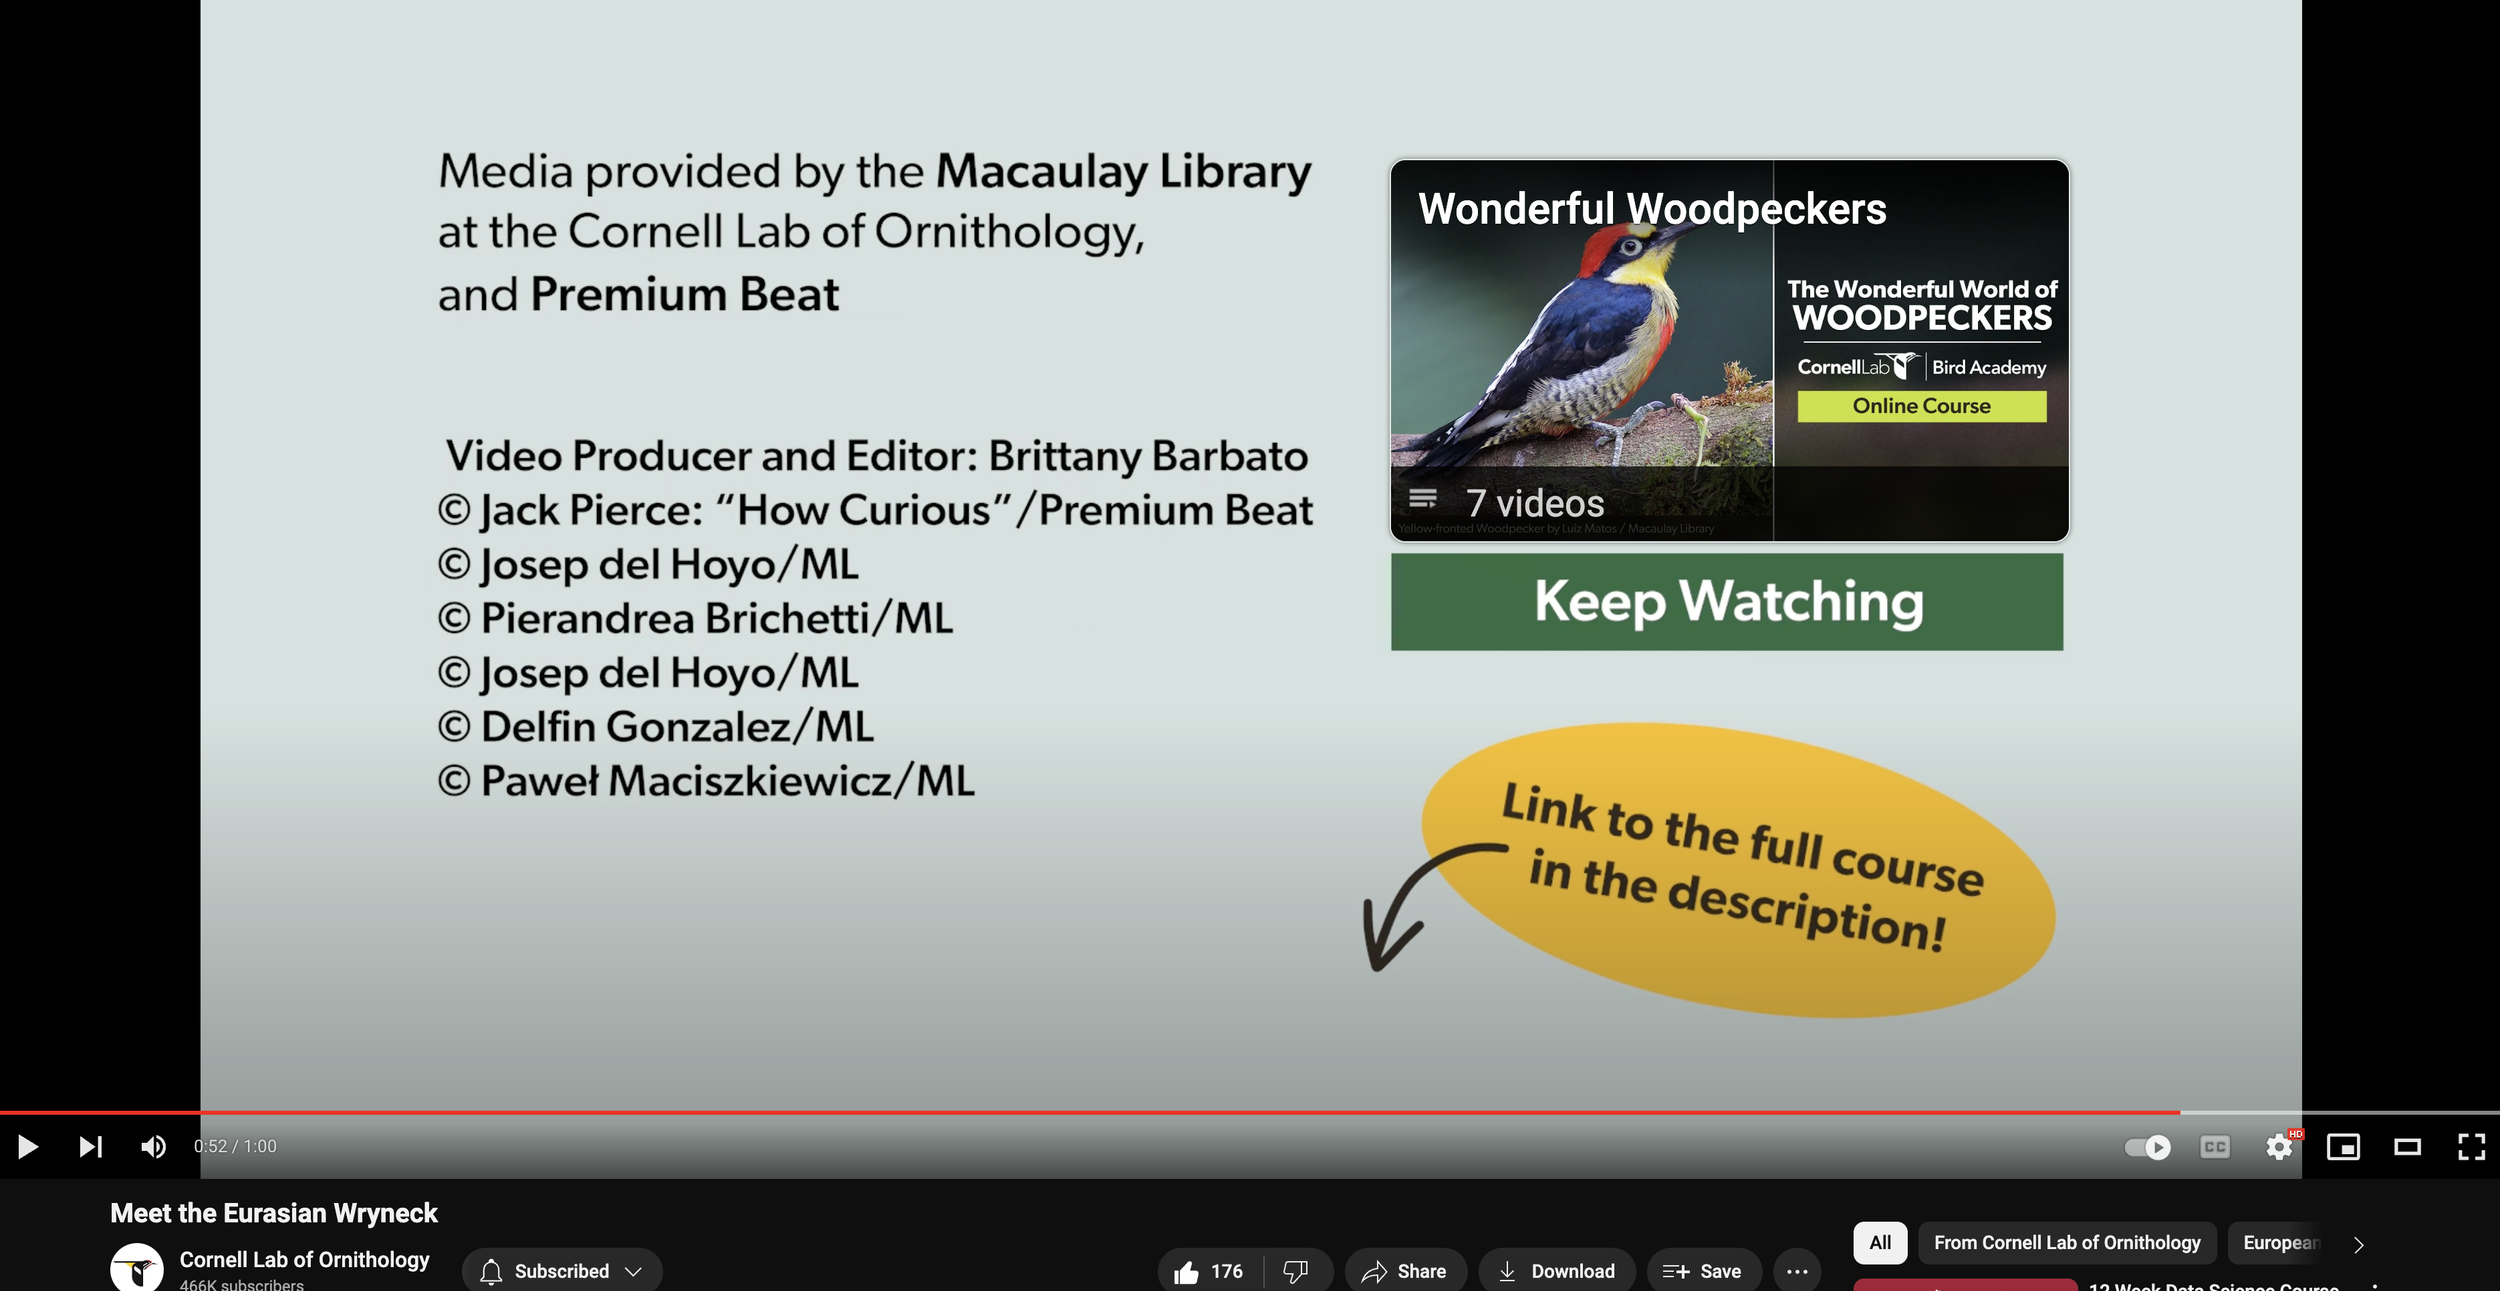  A screenshot of a light blue with the Cornell Lab of Ornithology bird logo, an orange bubble with black text that reads “Link to the full course in the description!” and a green box with white text that reads “Keep Watching” with a thumbnail image o